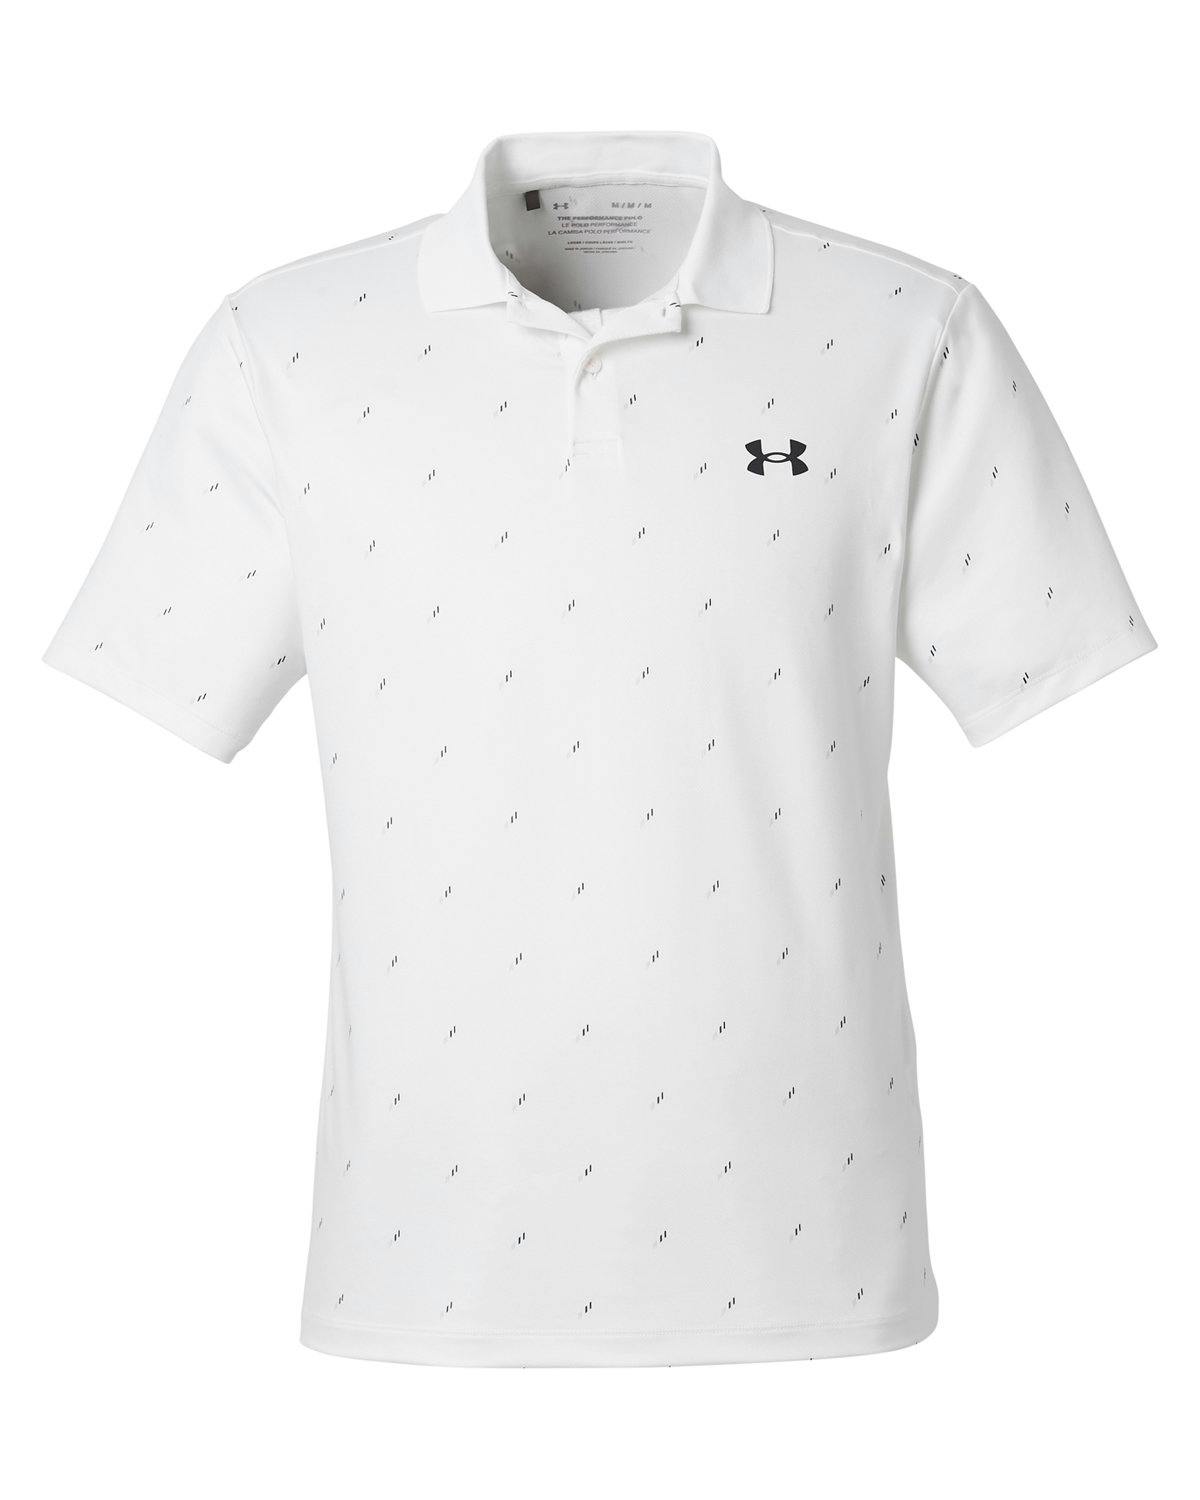 Image for Men's 3.0 Printed Performance Polo